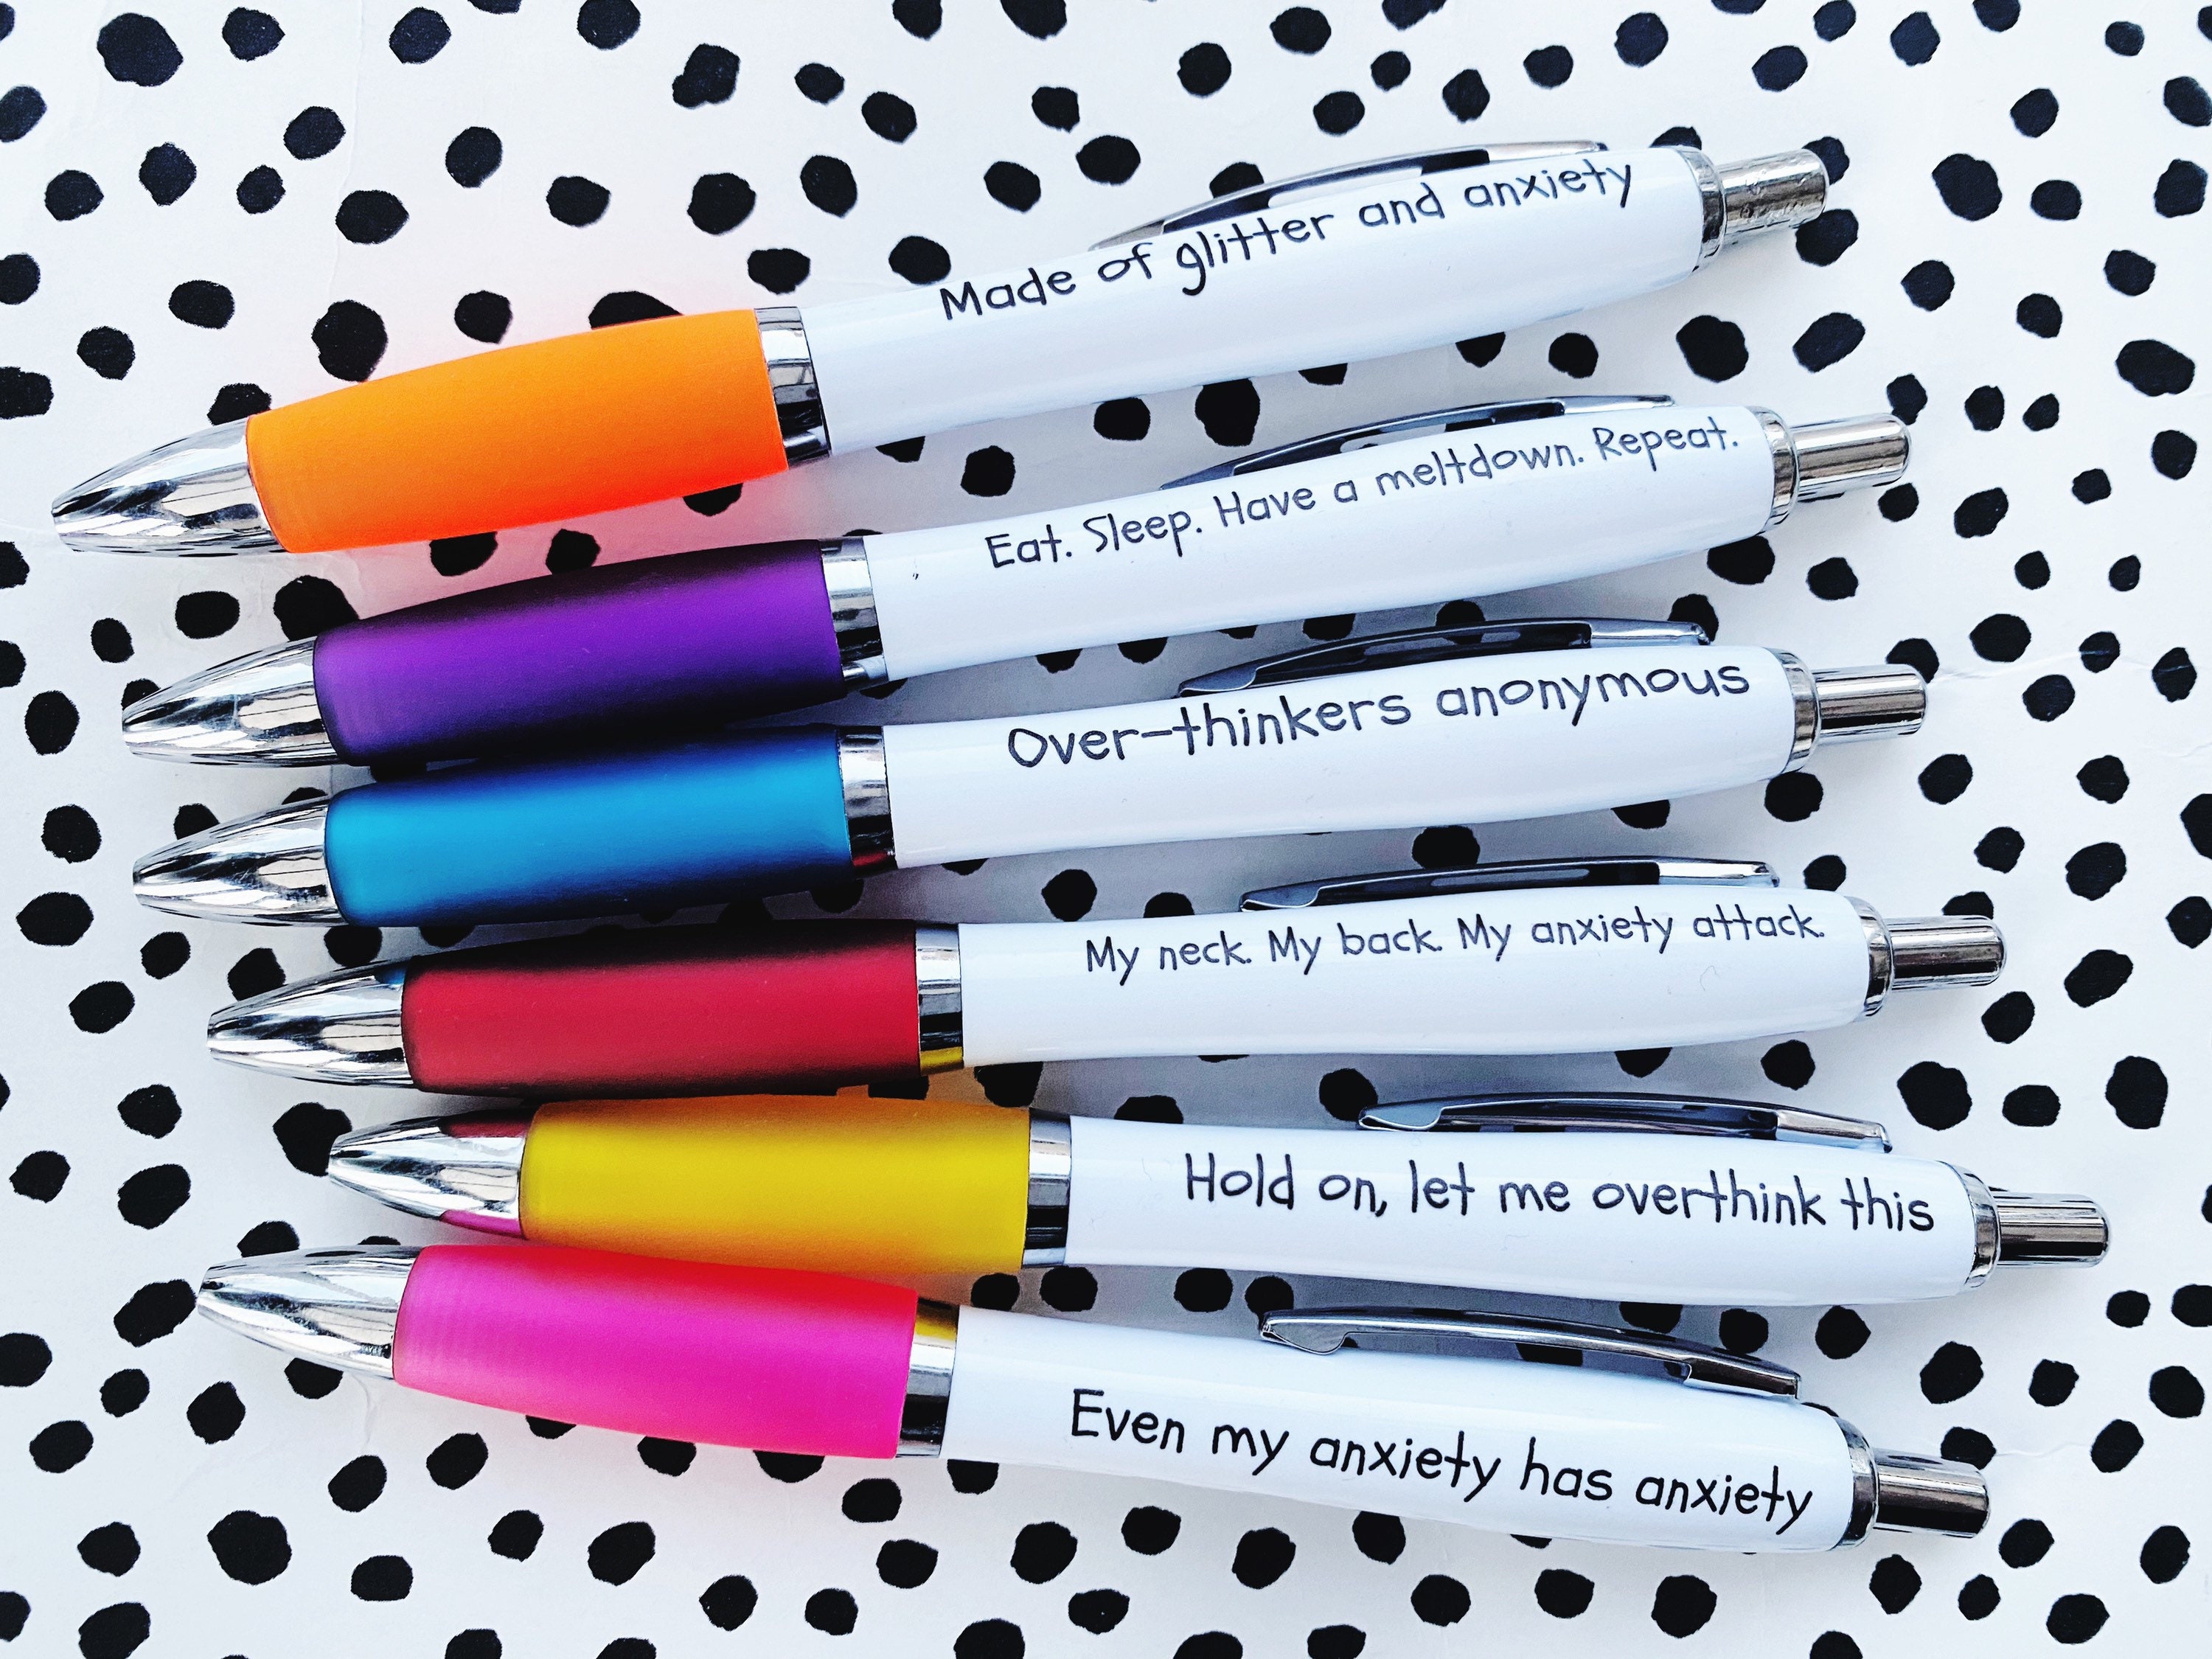 Sarcastic Office Pens, Work Pens, to Do List, Girl Boss Gift, Home Office  Stationery, Personalised Stationery 